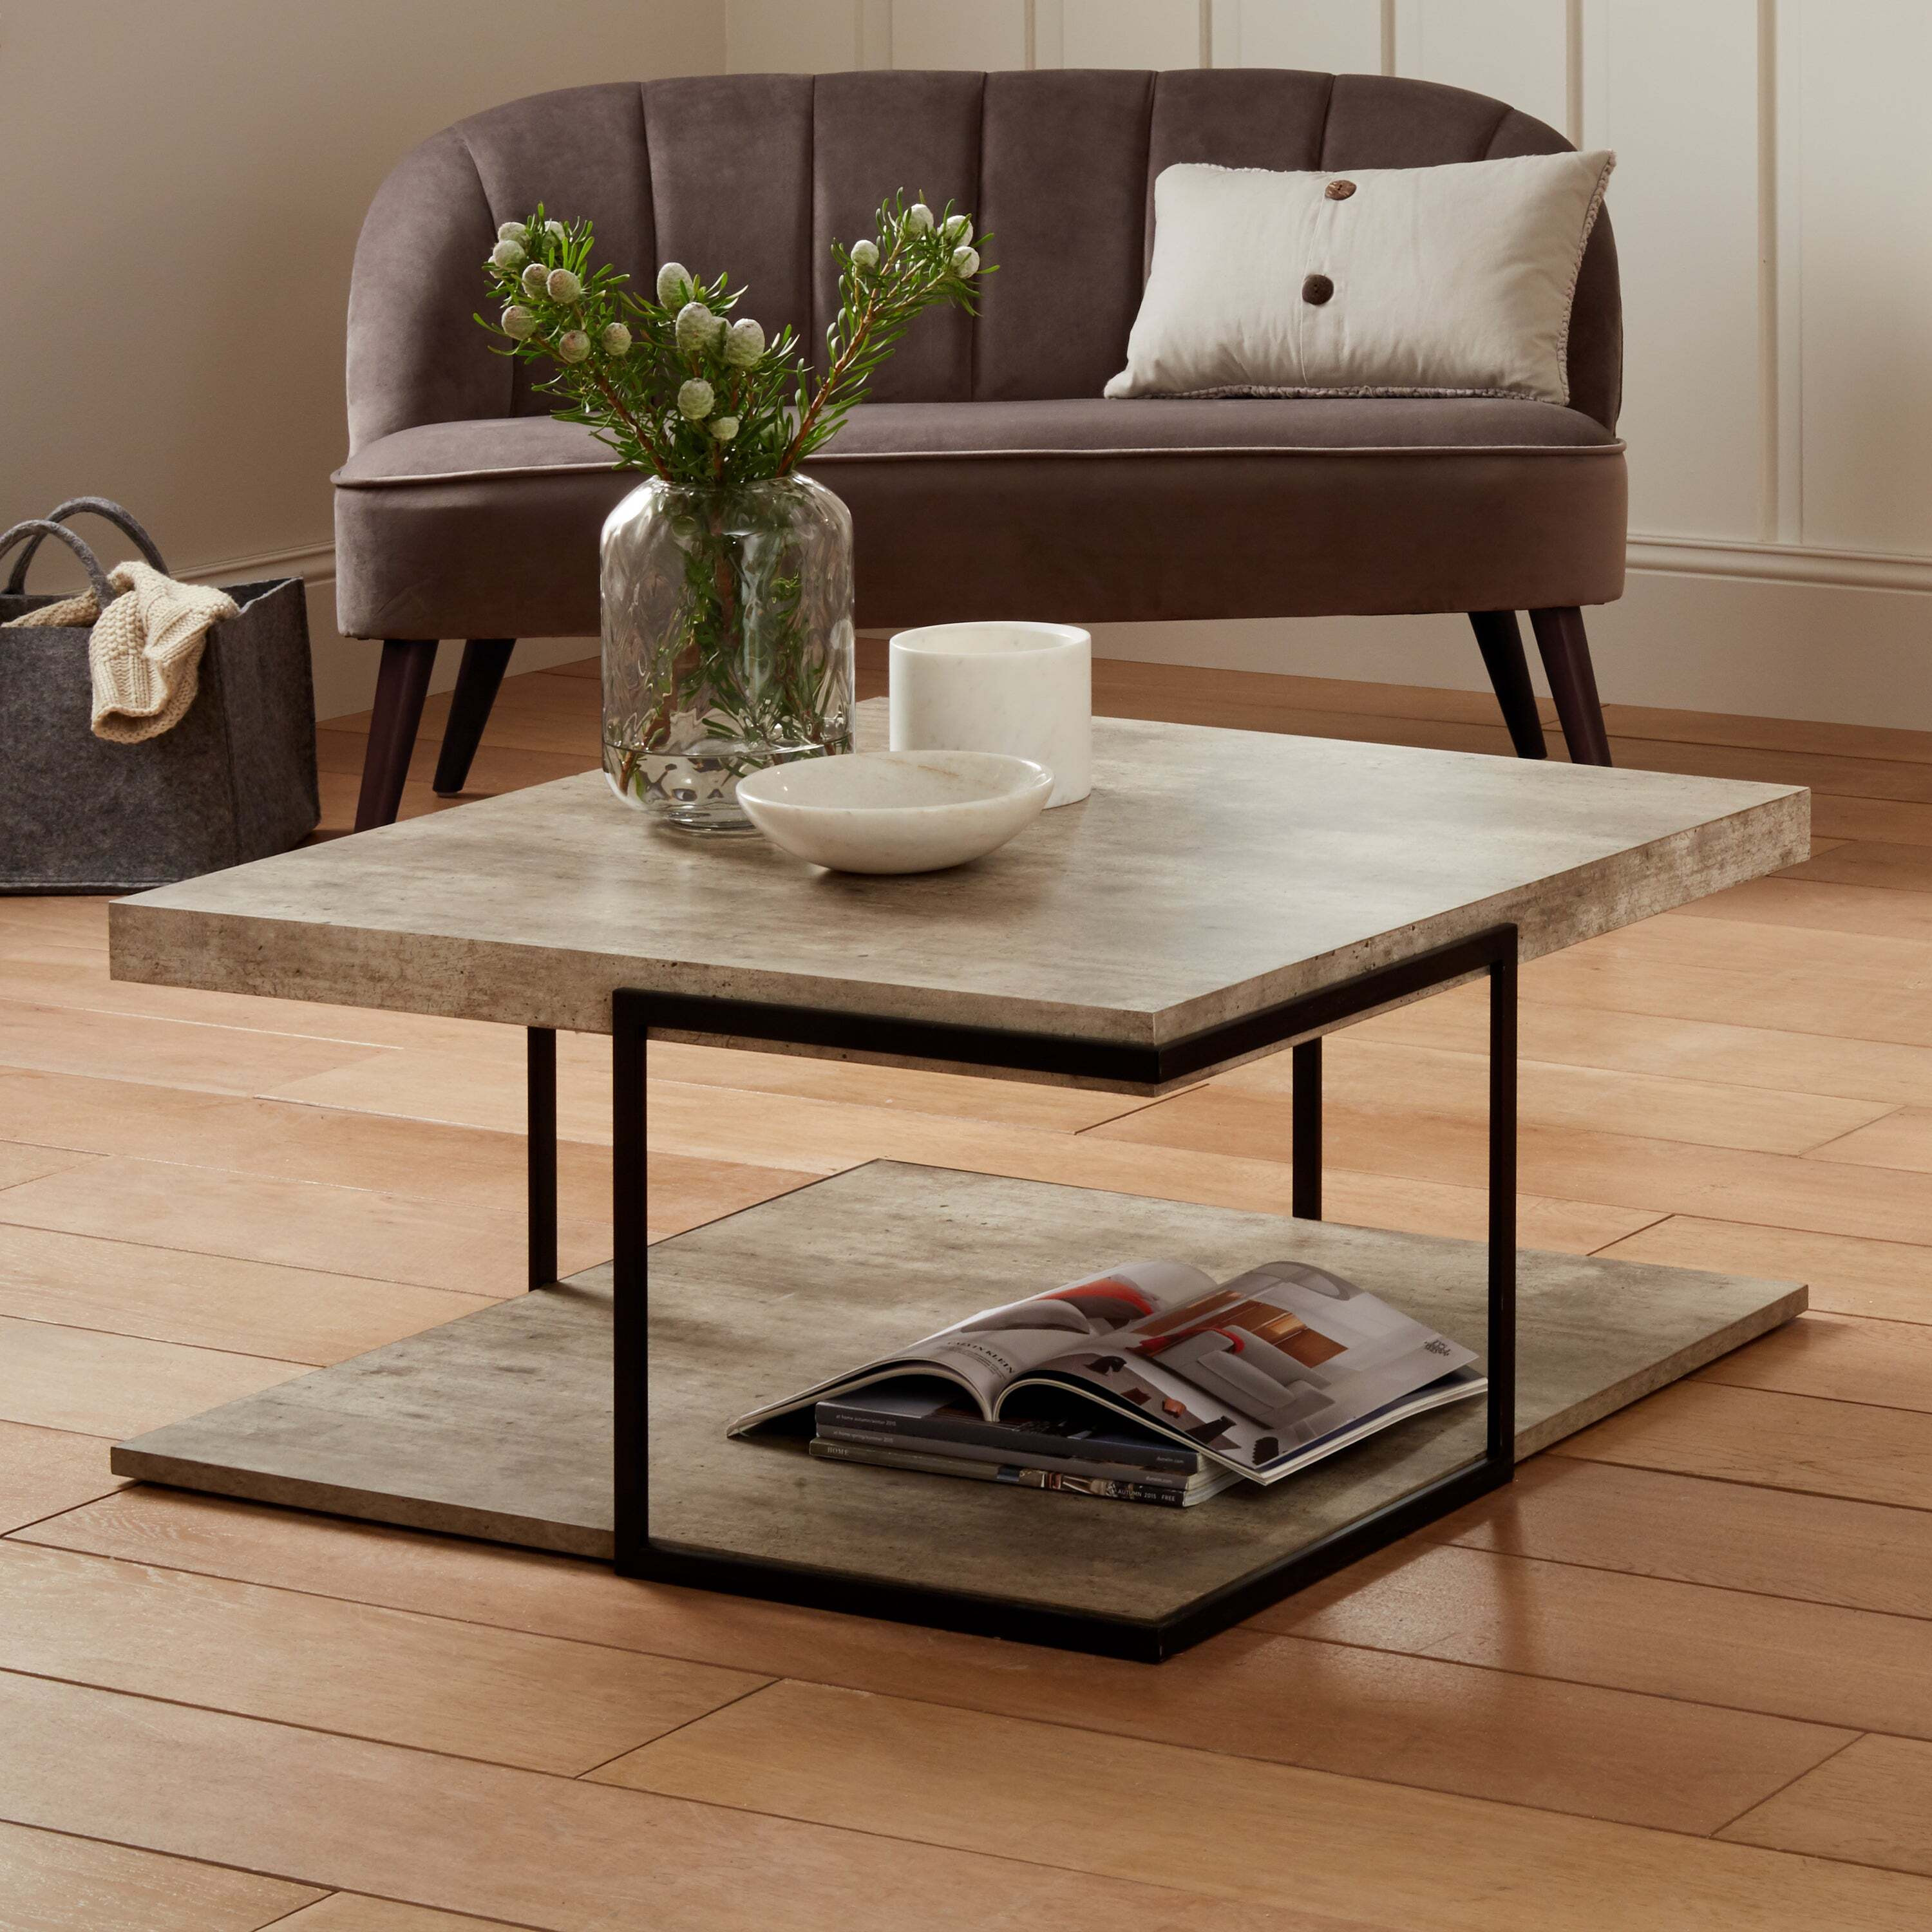 Pacific Jersey Lam Coffee Table, Grey Wood Effect Grey